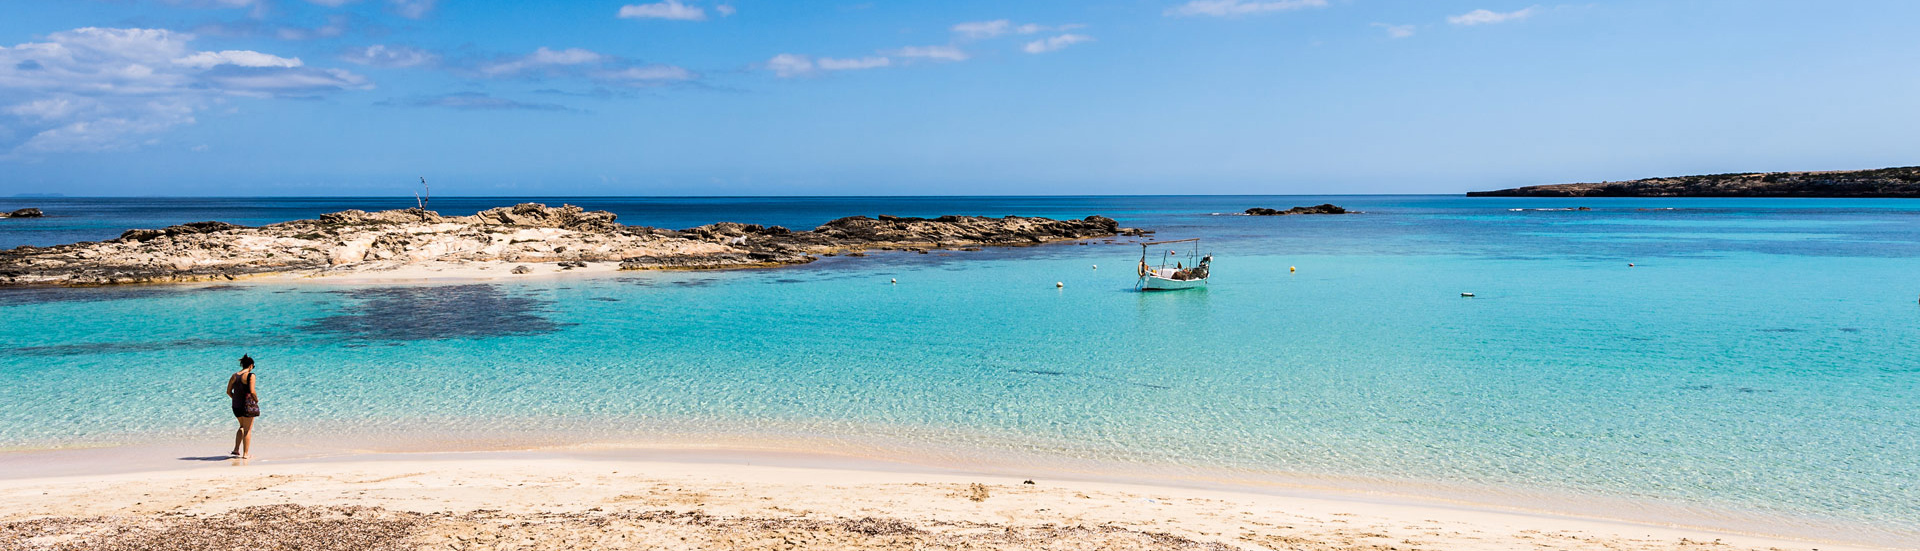 How much is the entrance fee to Ses Illetes beach in Formentera?